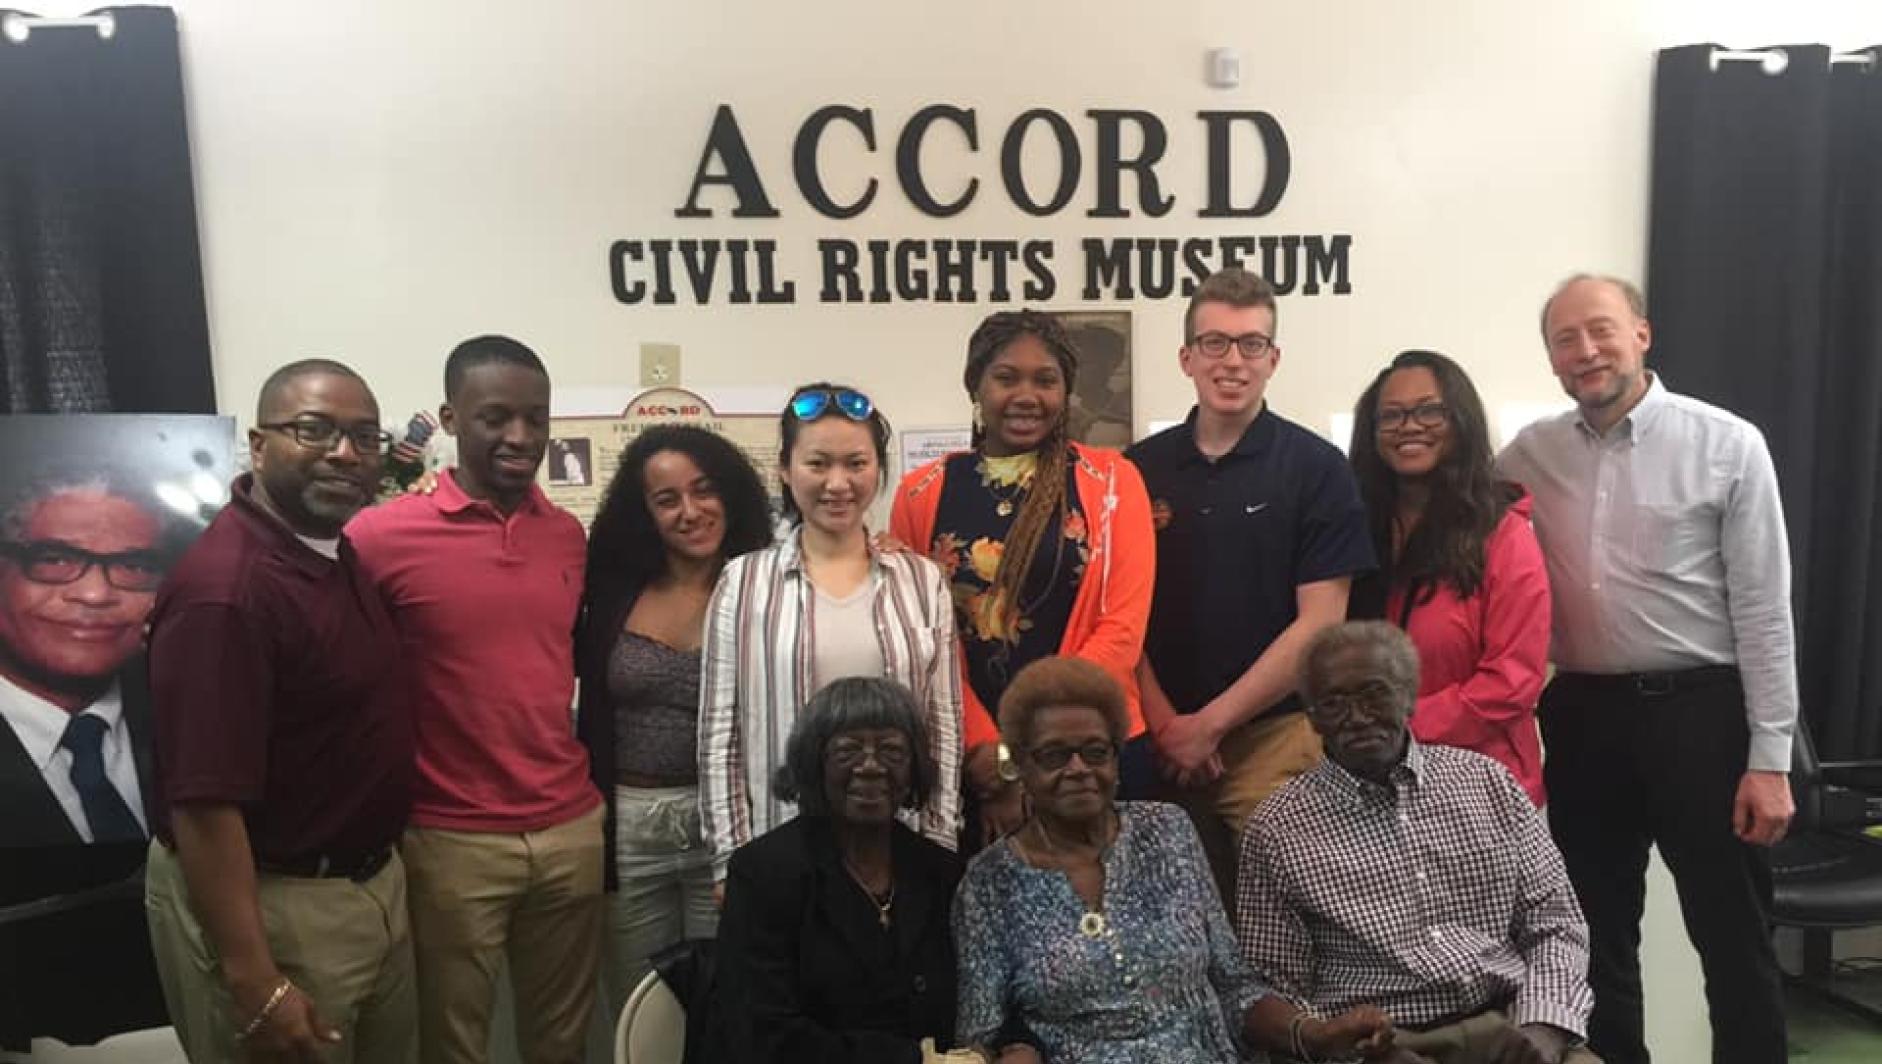 Calvin Hill, Marty Dobrow, and students at the ACCORD Civil Rights Museum. 